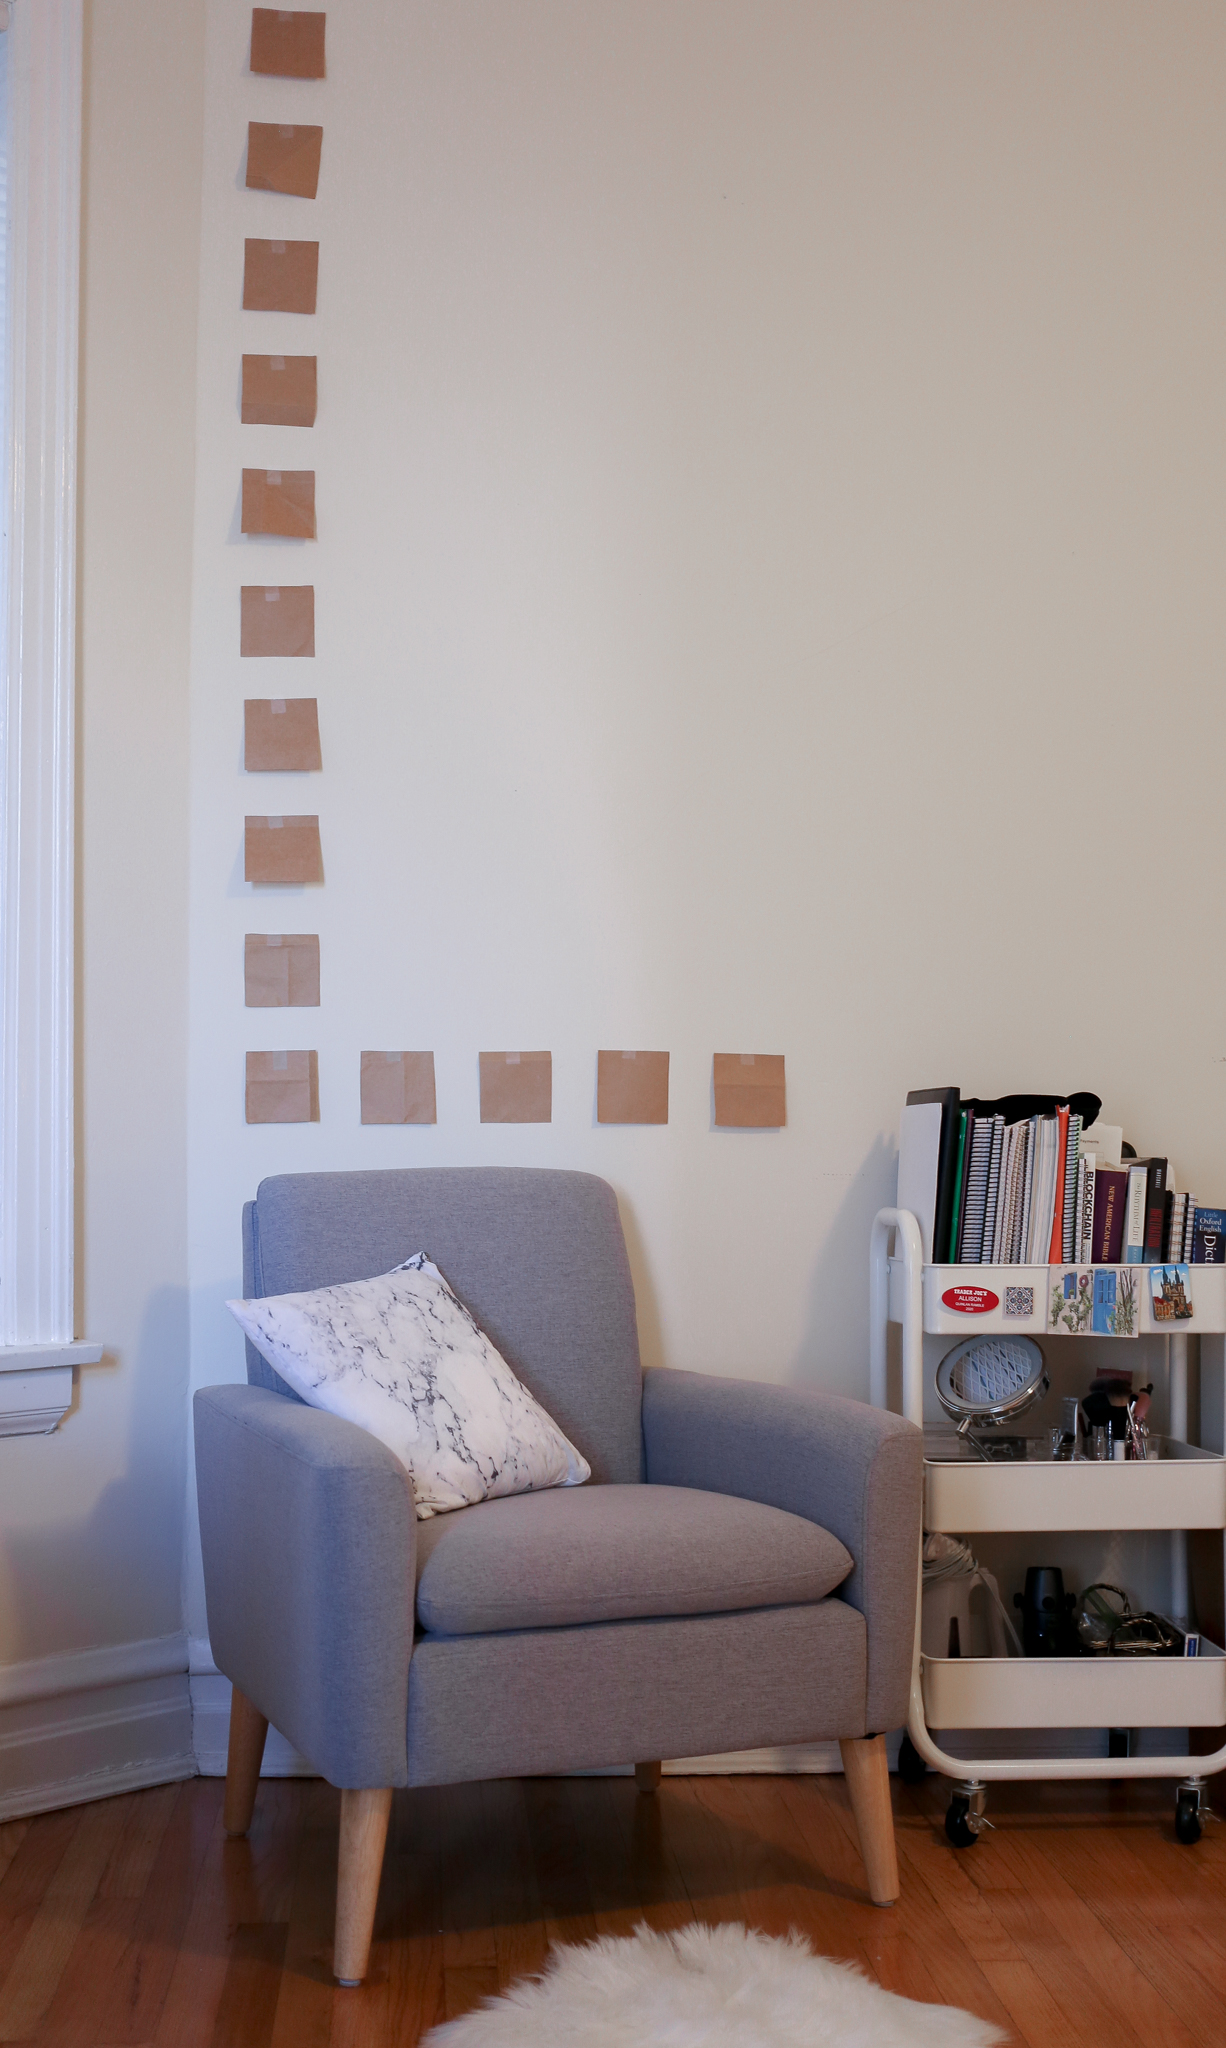 templates on the wall to guide placement